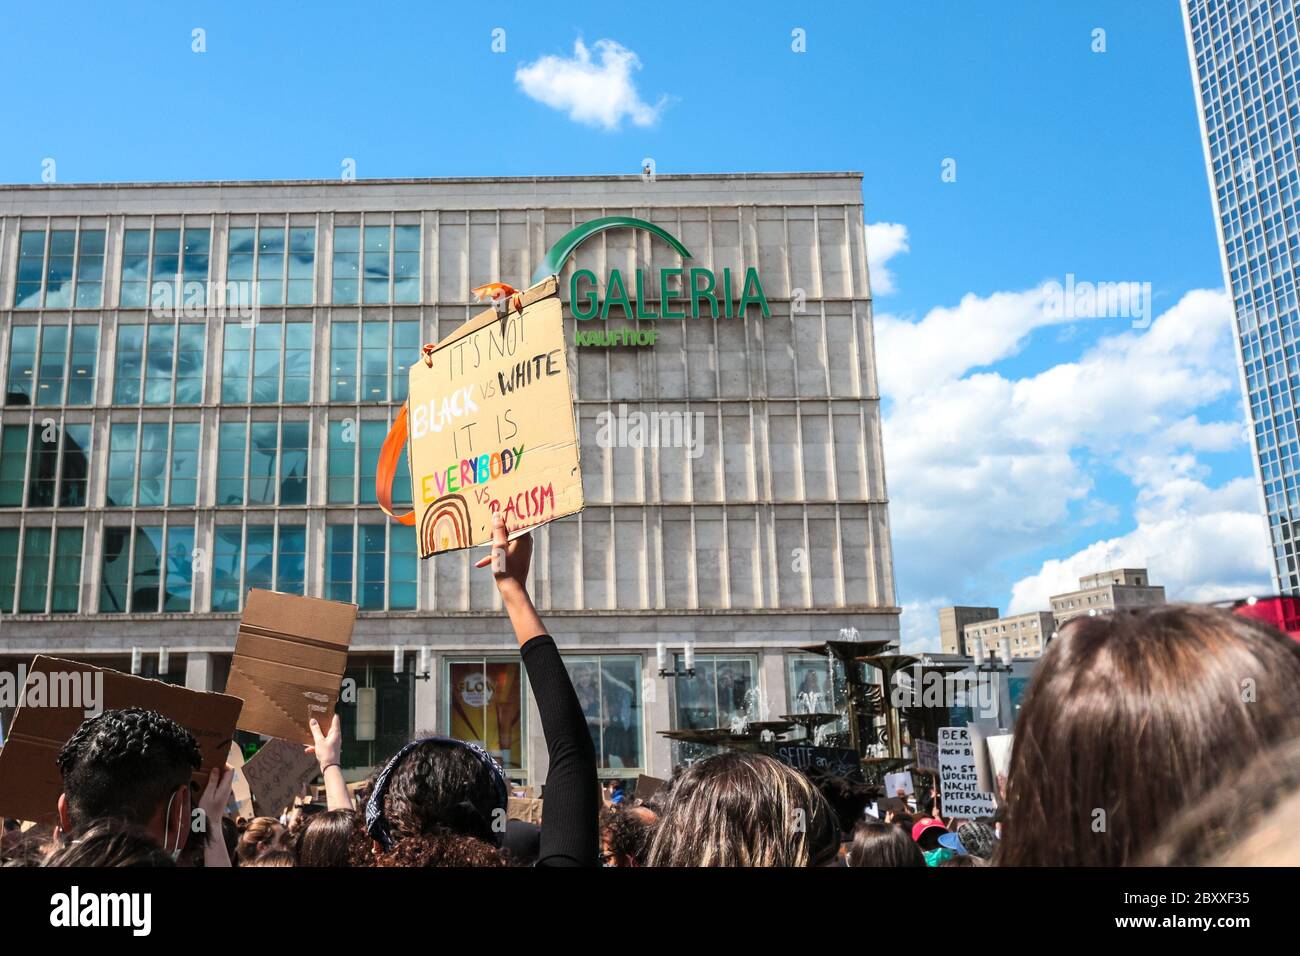 Crowds of protestors with anti-racism placards at a Black Lives Matter protest on Alexanderplatz Berlin, Germany, following the death of George Floyd. Stock Photo